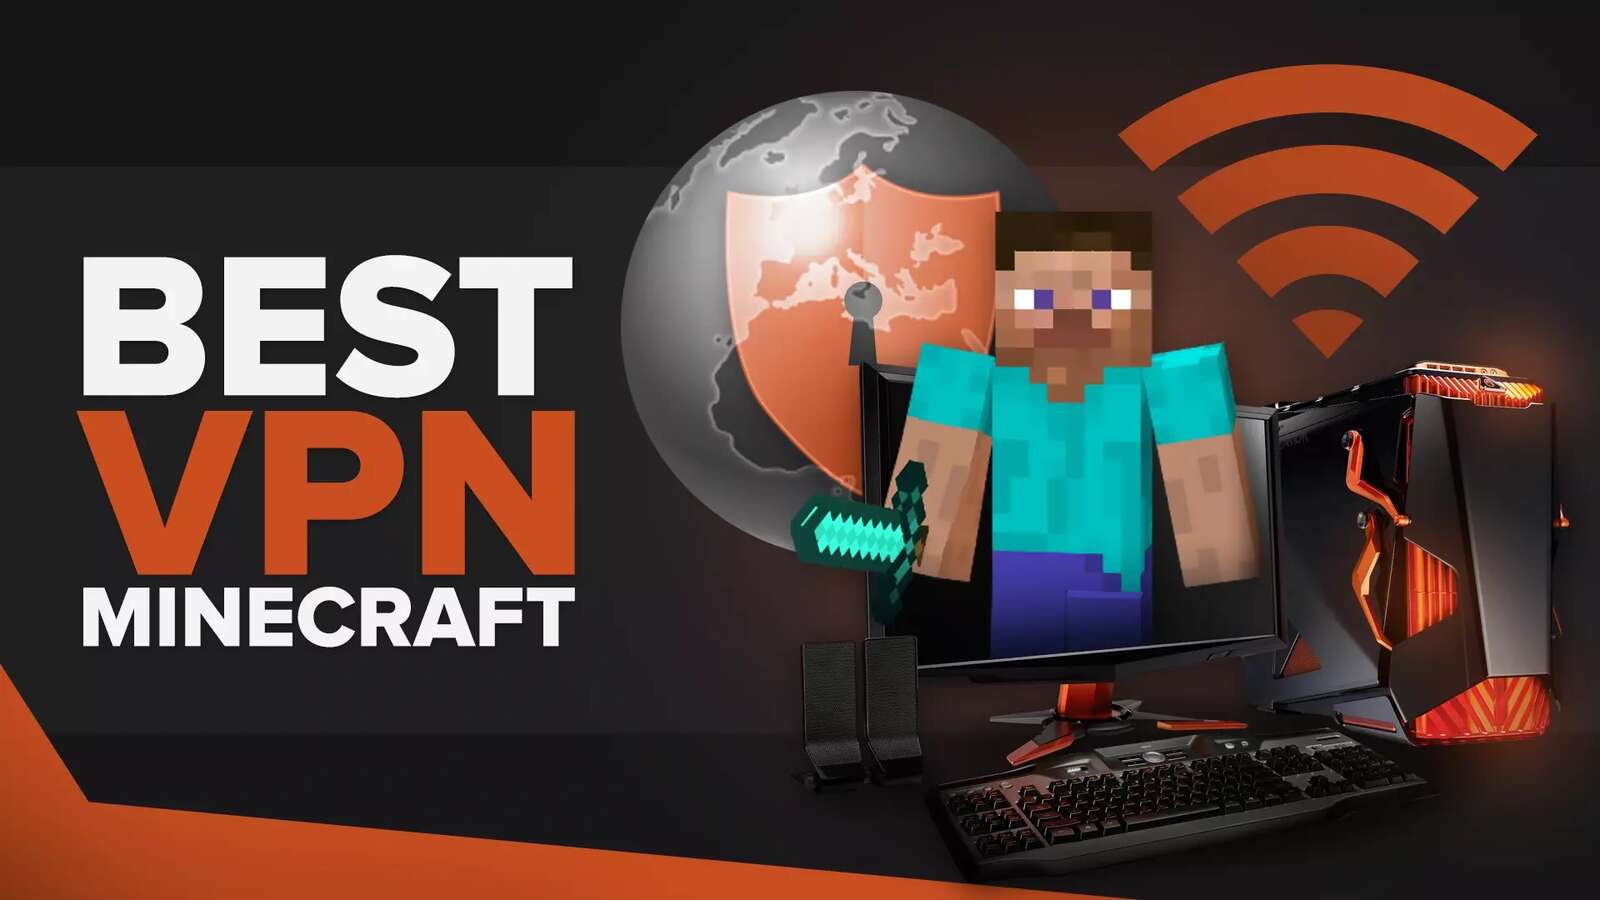 What Is The Best VPN For Minecraft? [Top 4 Picks]